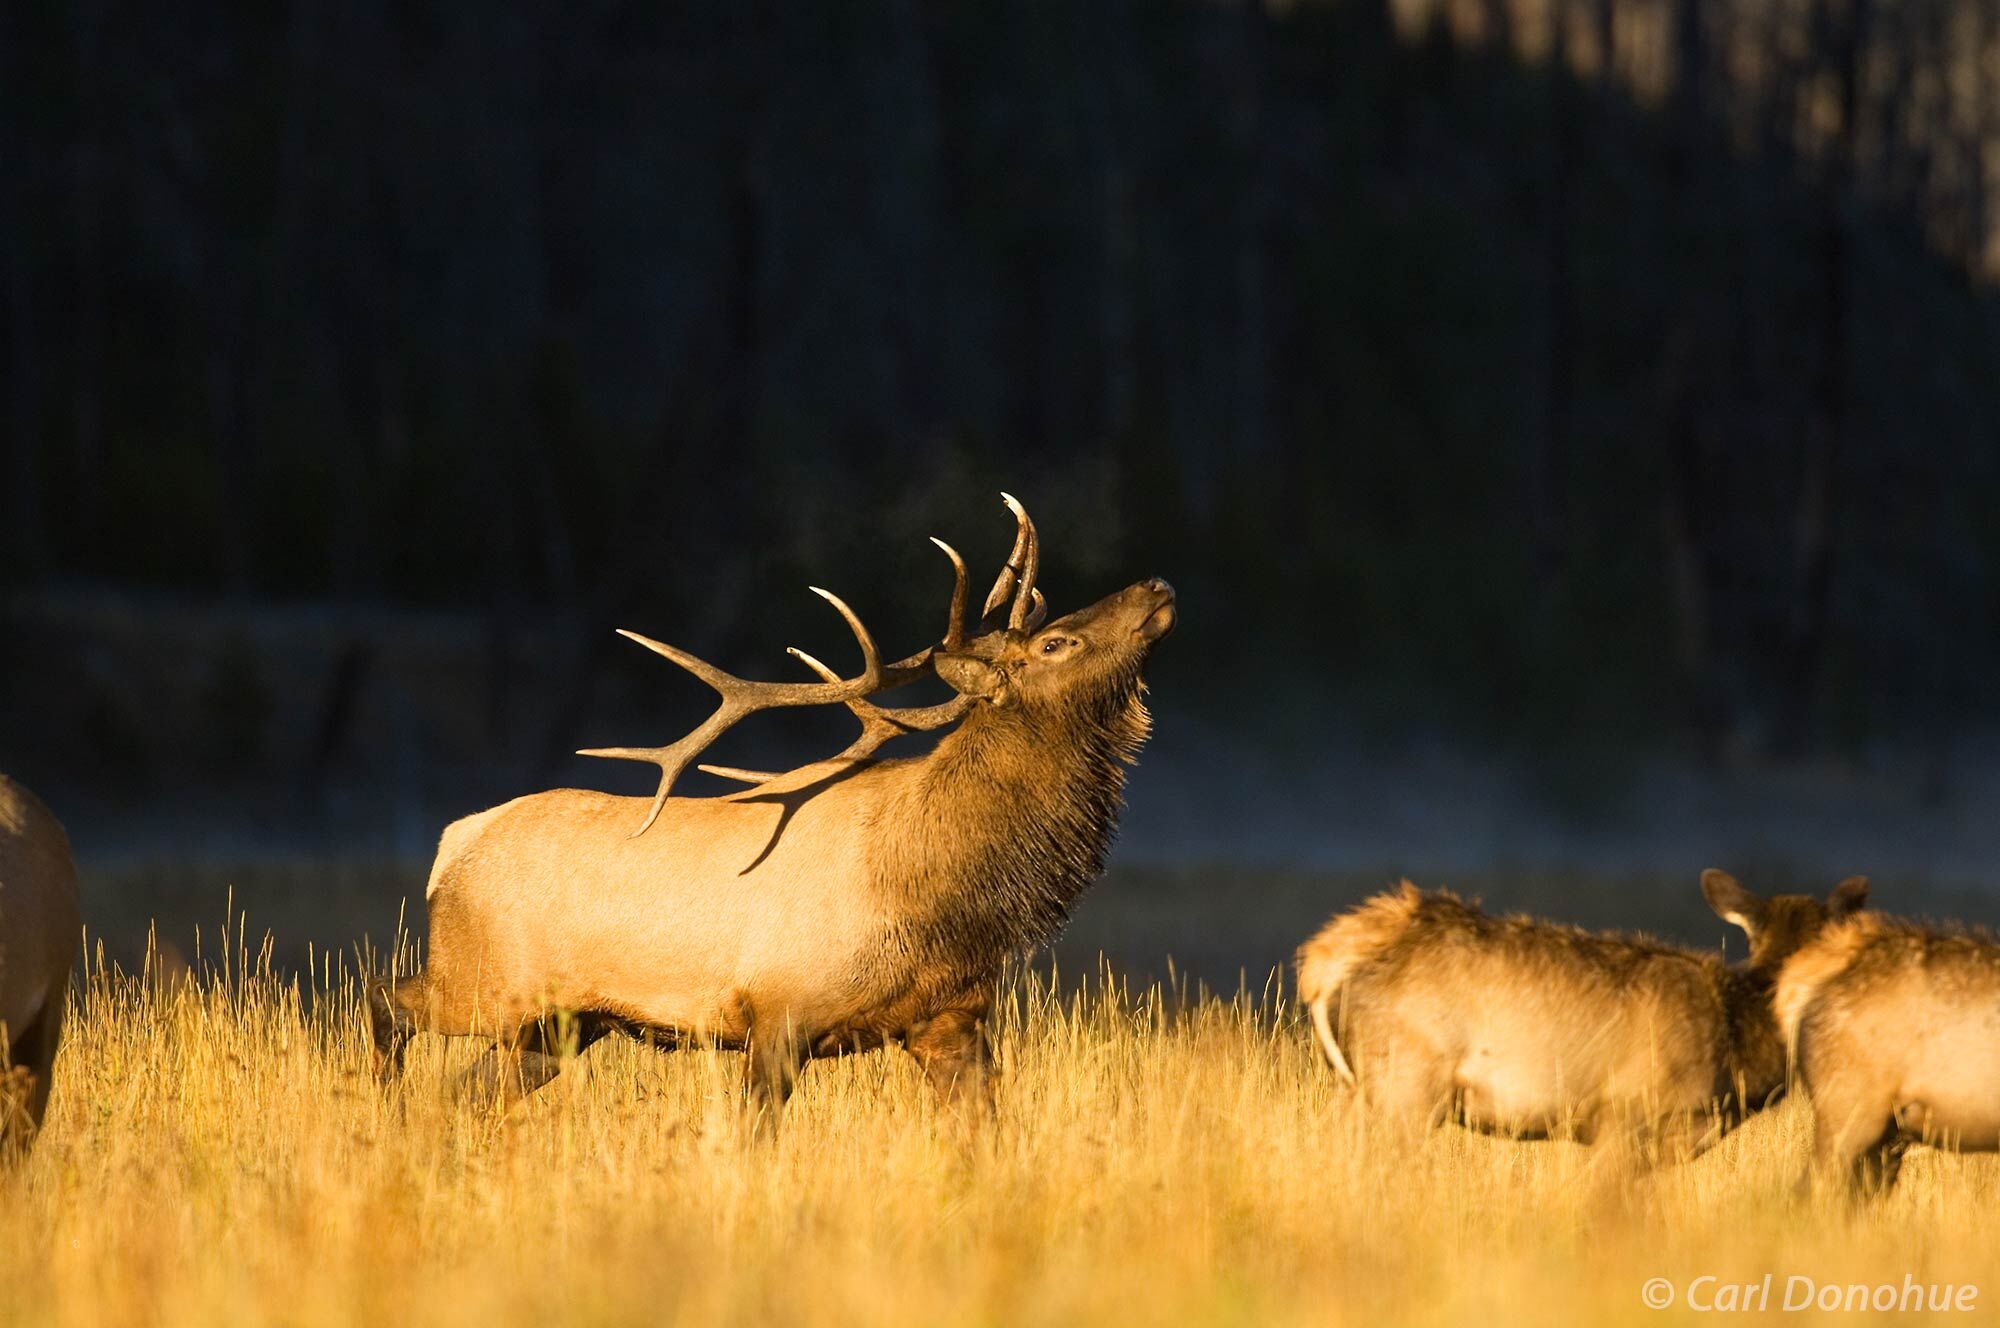 Bull elk posturing in front of his herd, early morning light, Madison River, Yellowstone National Park, Wyoming.